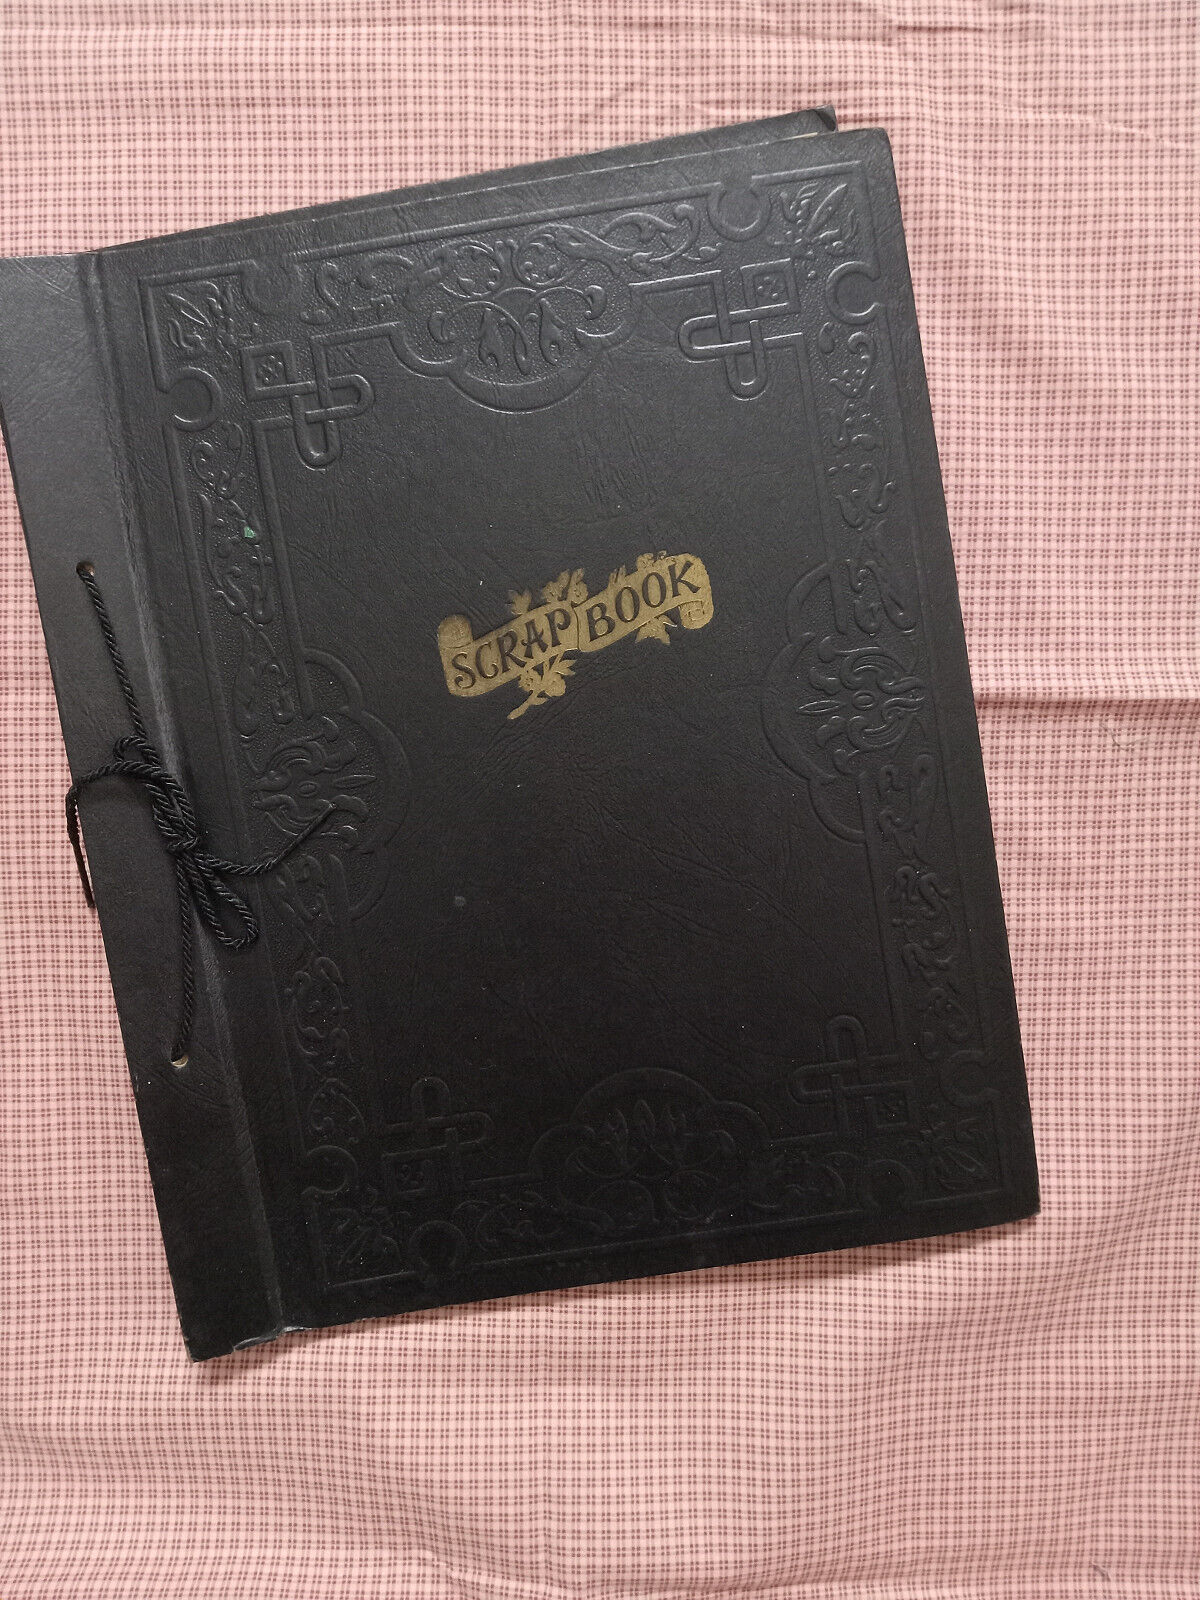 large vintage empty scrapbook - expandable embossed black cover - 24 blank pages